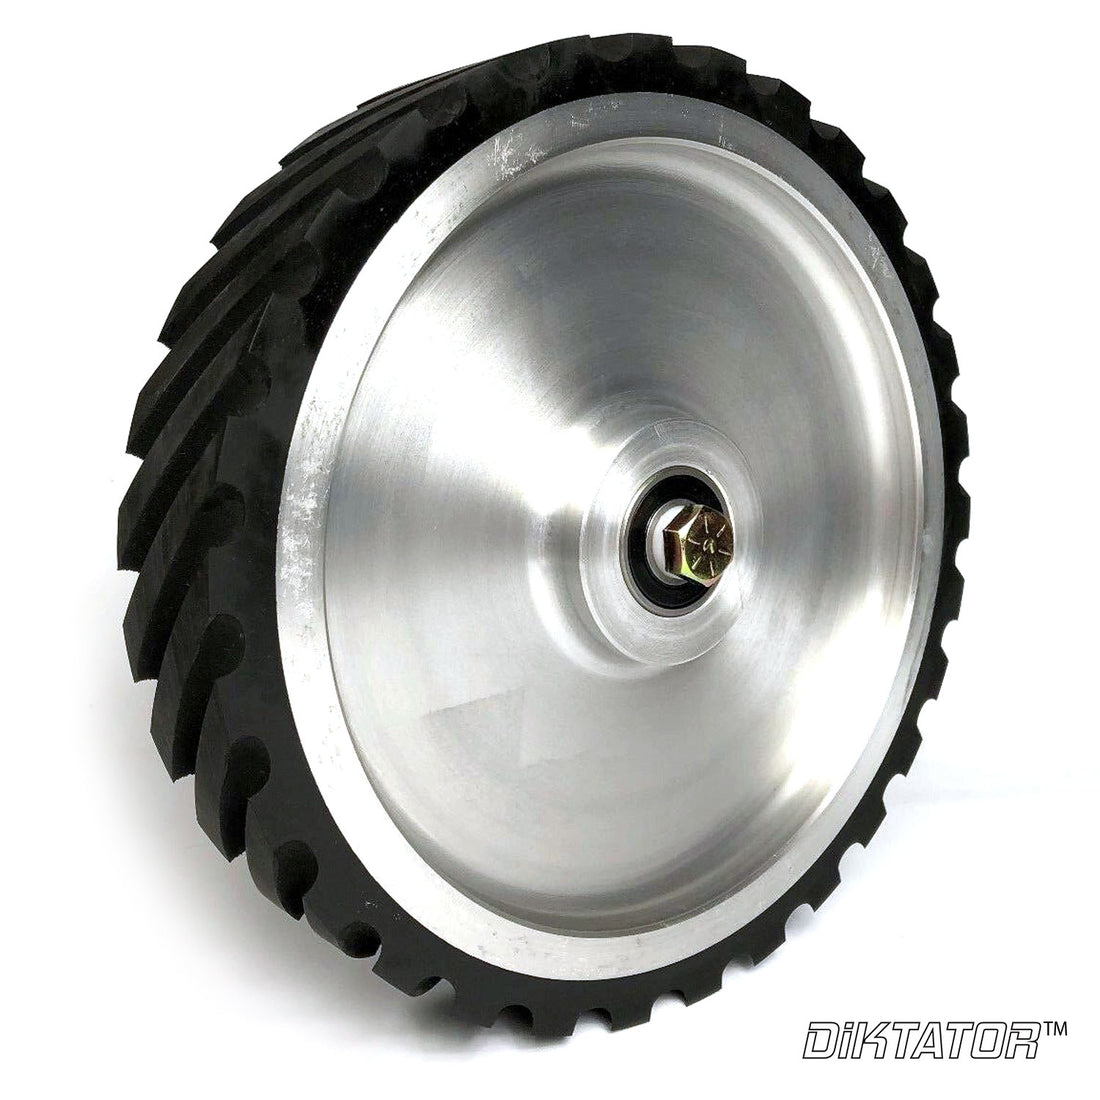 Large 10" Rubber Contact Wheel ($259)